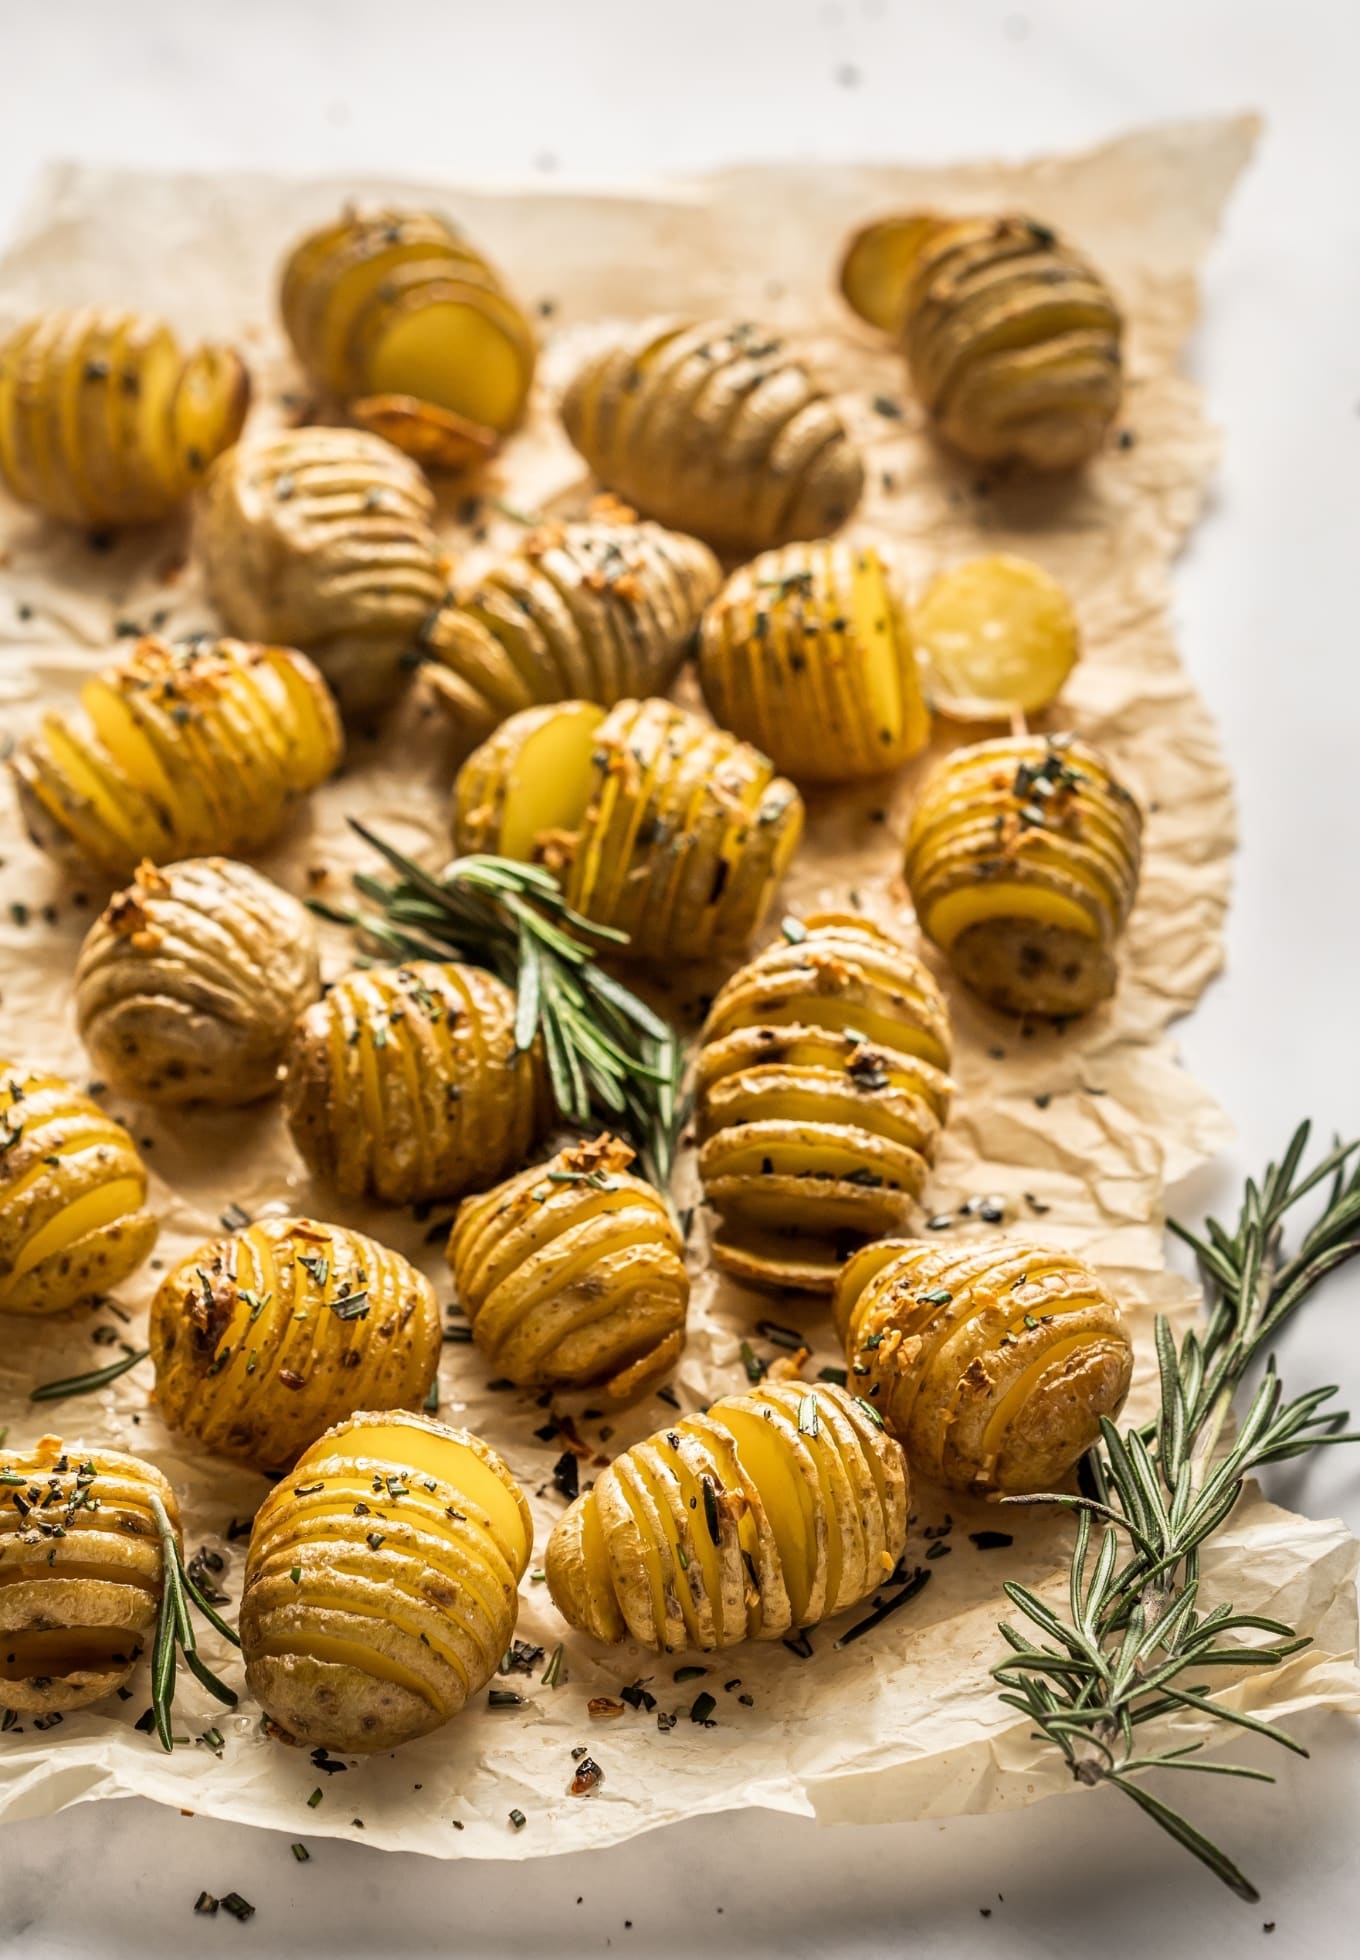 https://thewholecook.com/wp-content/uploads/2021/03/Garlic-Rosemary-Baby-Hasselback-Potatoes-by-The-Whole-Cook-vertical.jpg